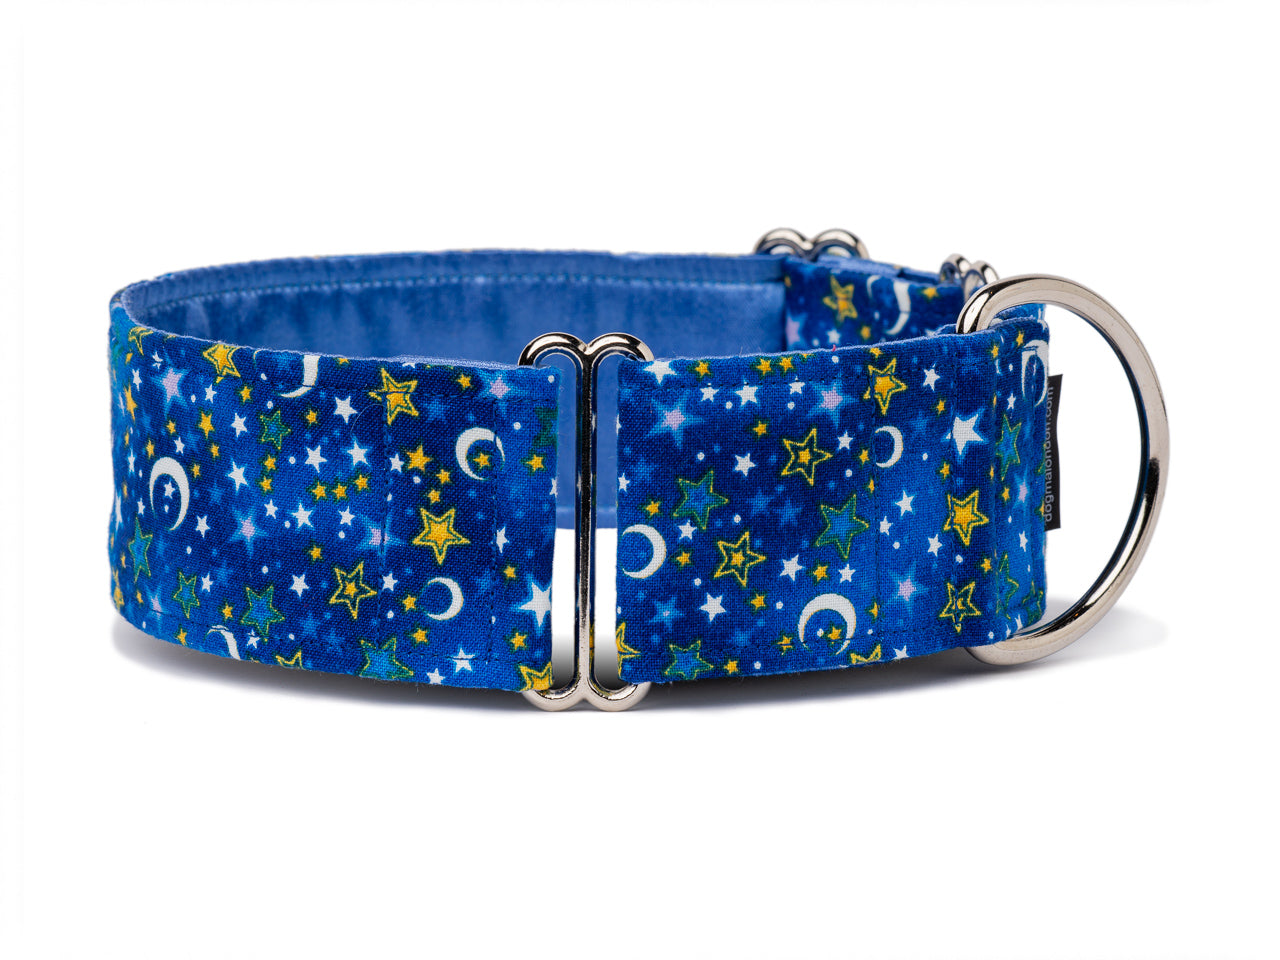 Your pooch is sure to have sweet dreams in this pretty blue collar sprinkled with stars and moons like a clear night sky!